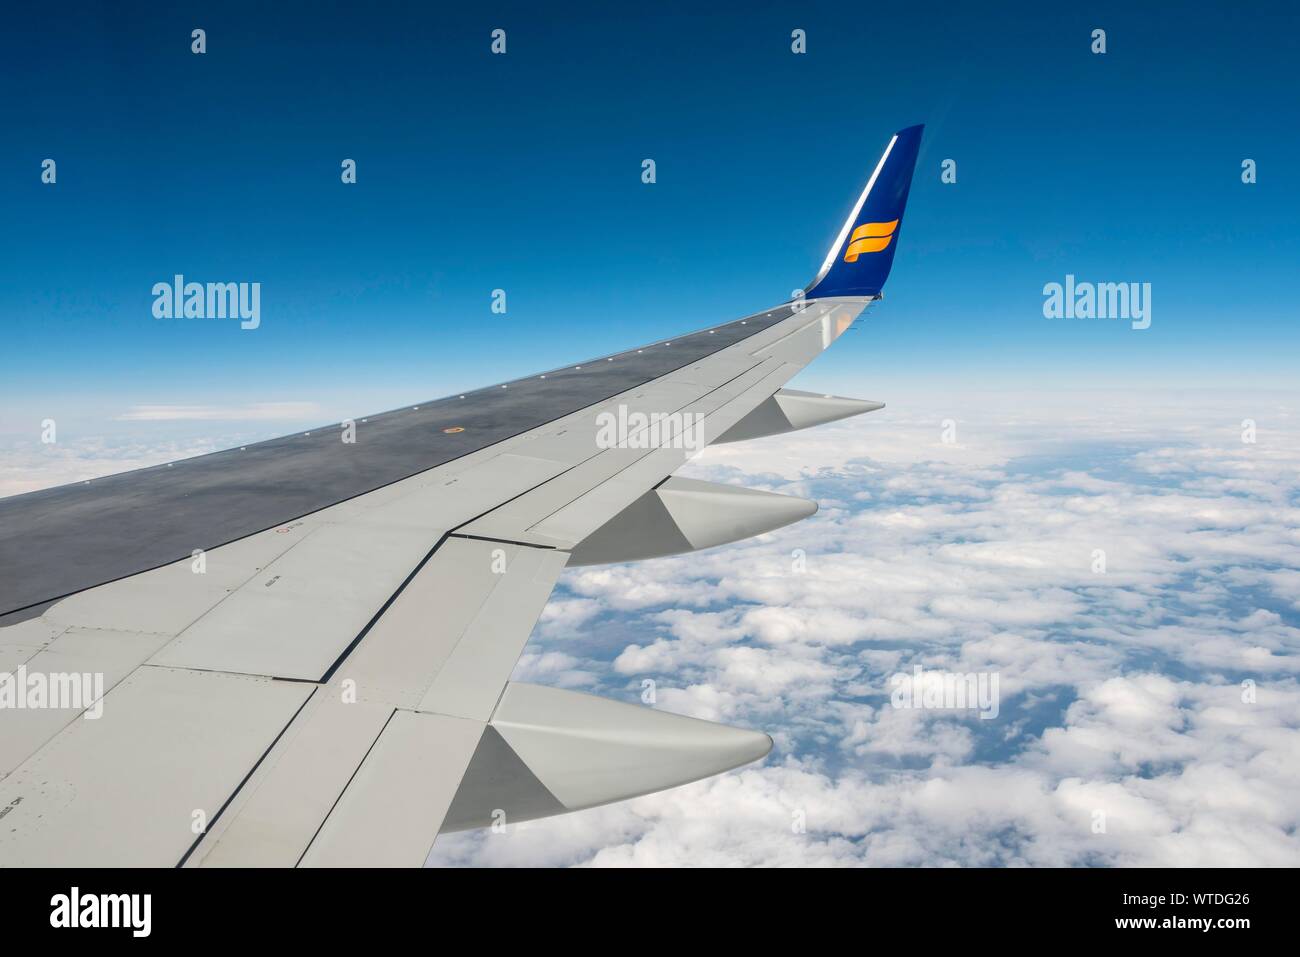 Wing, aircraft from IcelandAir over cloudy sky, Iceland Stock Photo